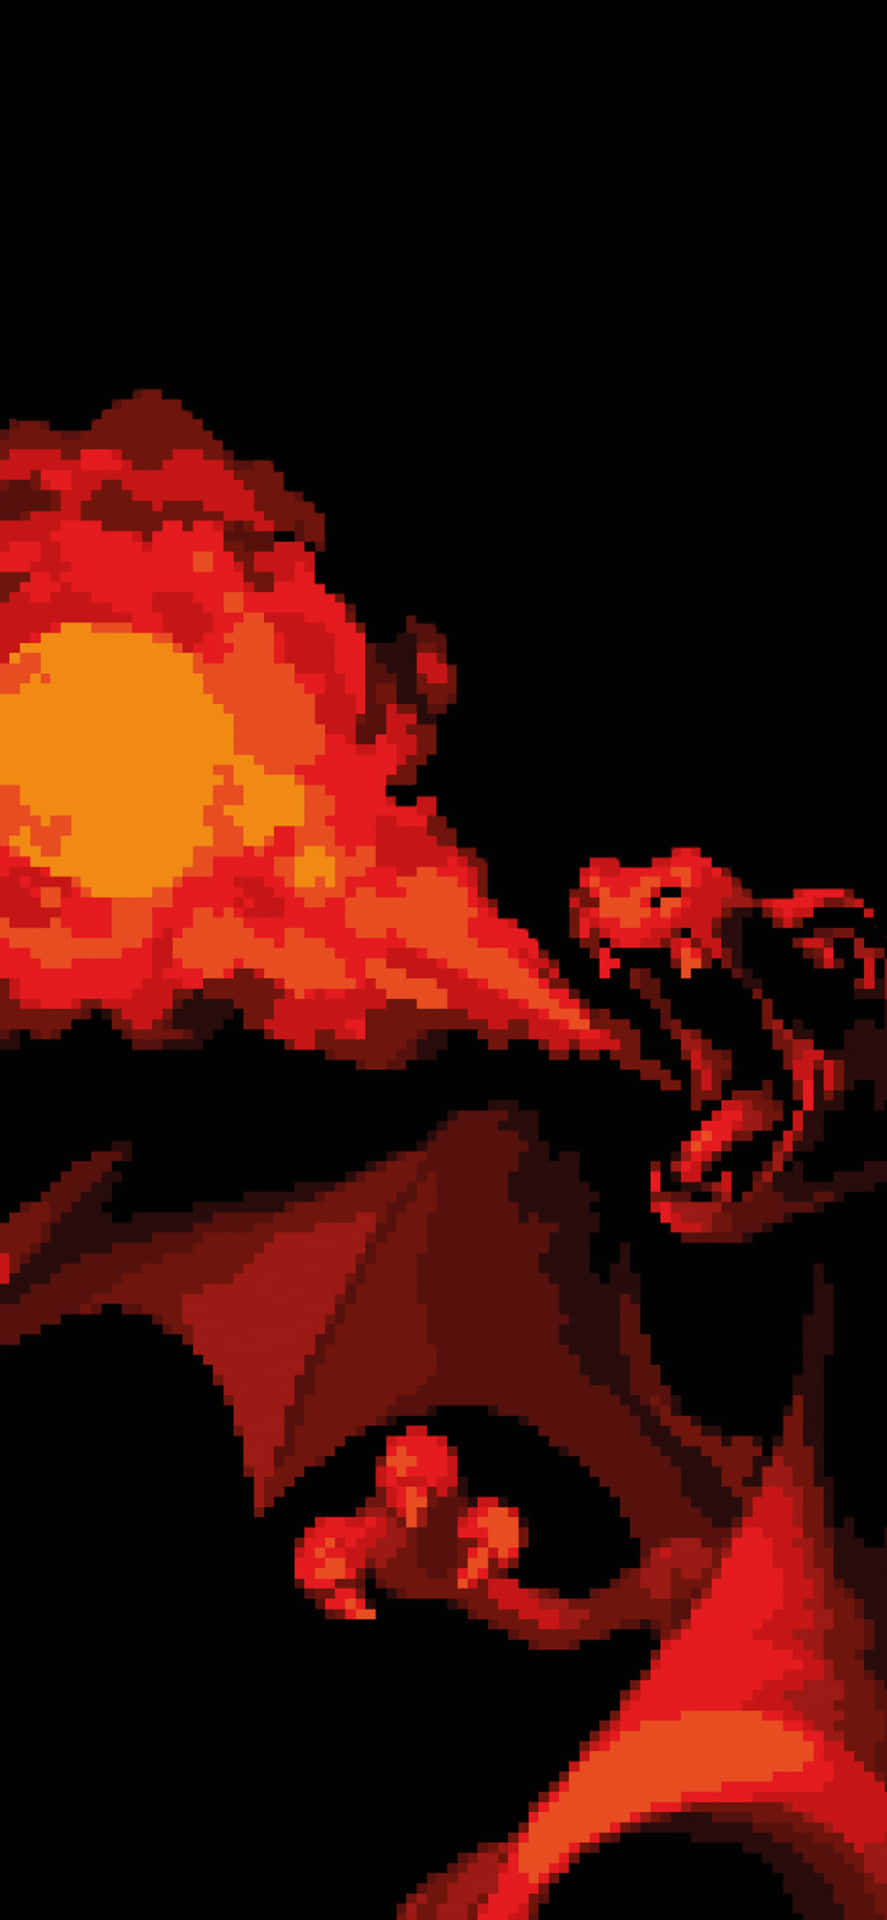 Charizard, a Fire and Flying-type Pokemon Wallpaper